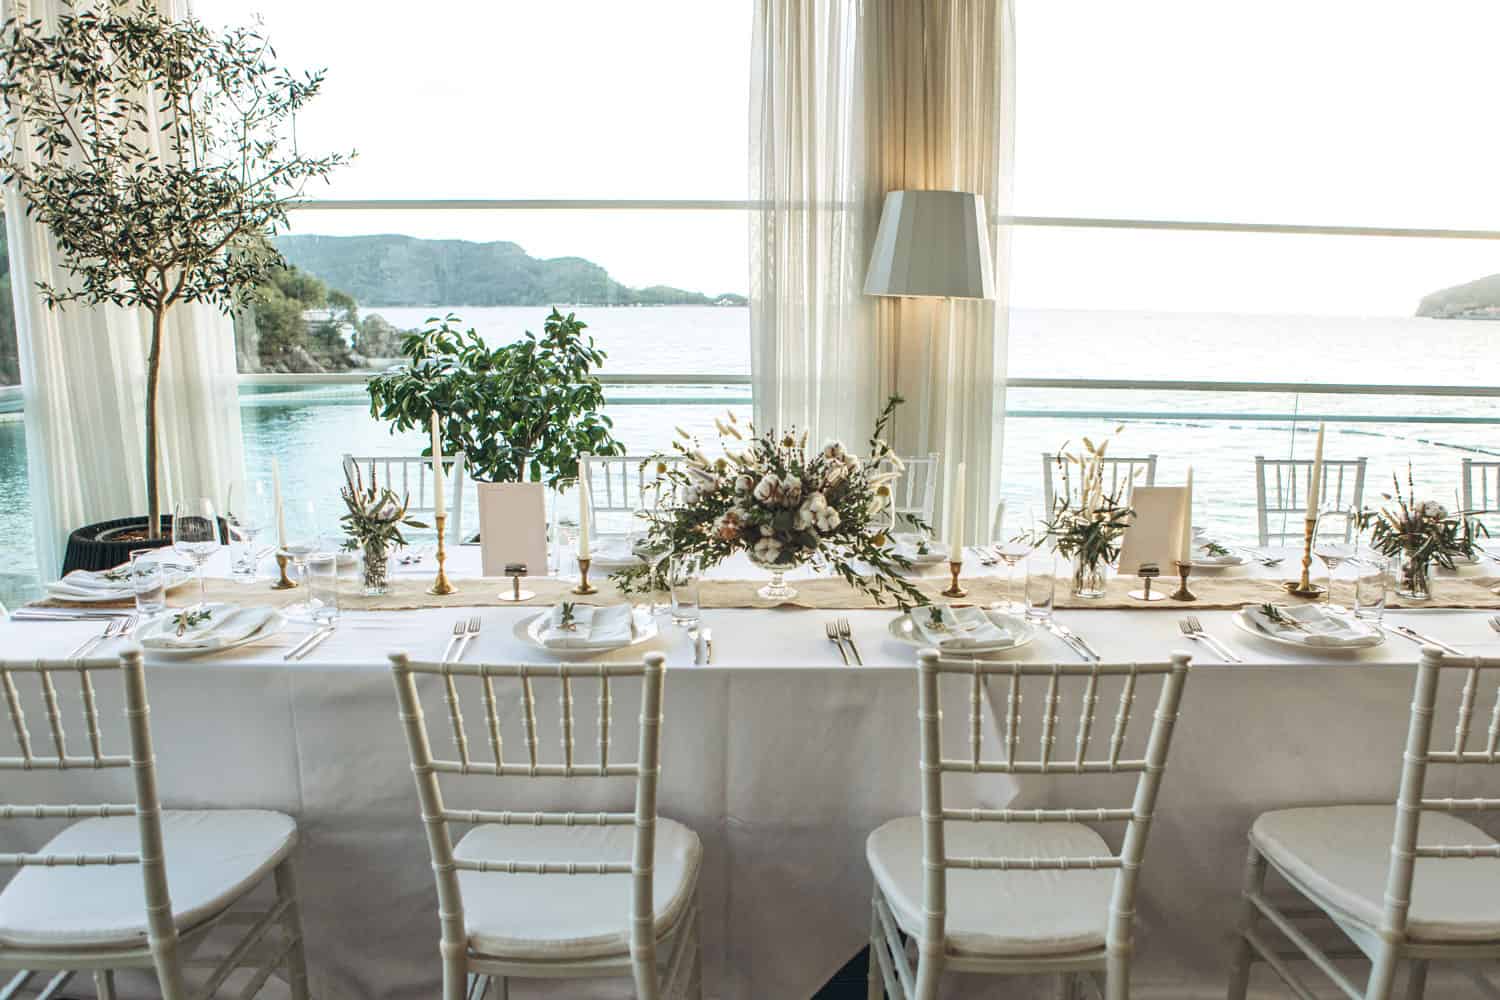 Beautiful wedding setting or classic dine of table set-up